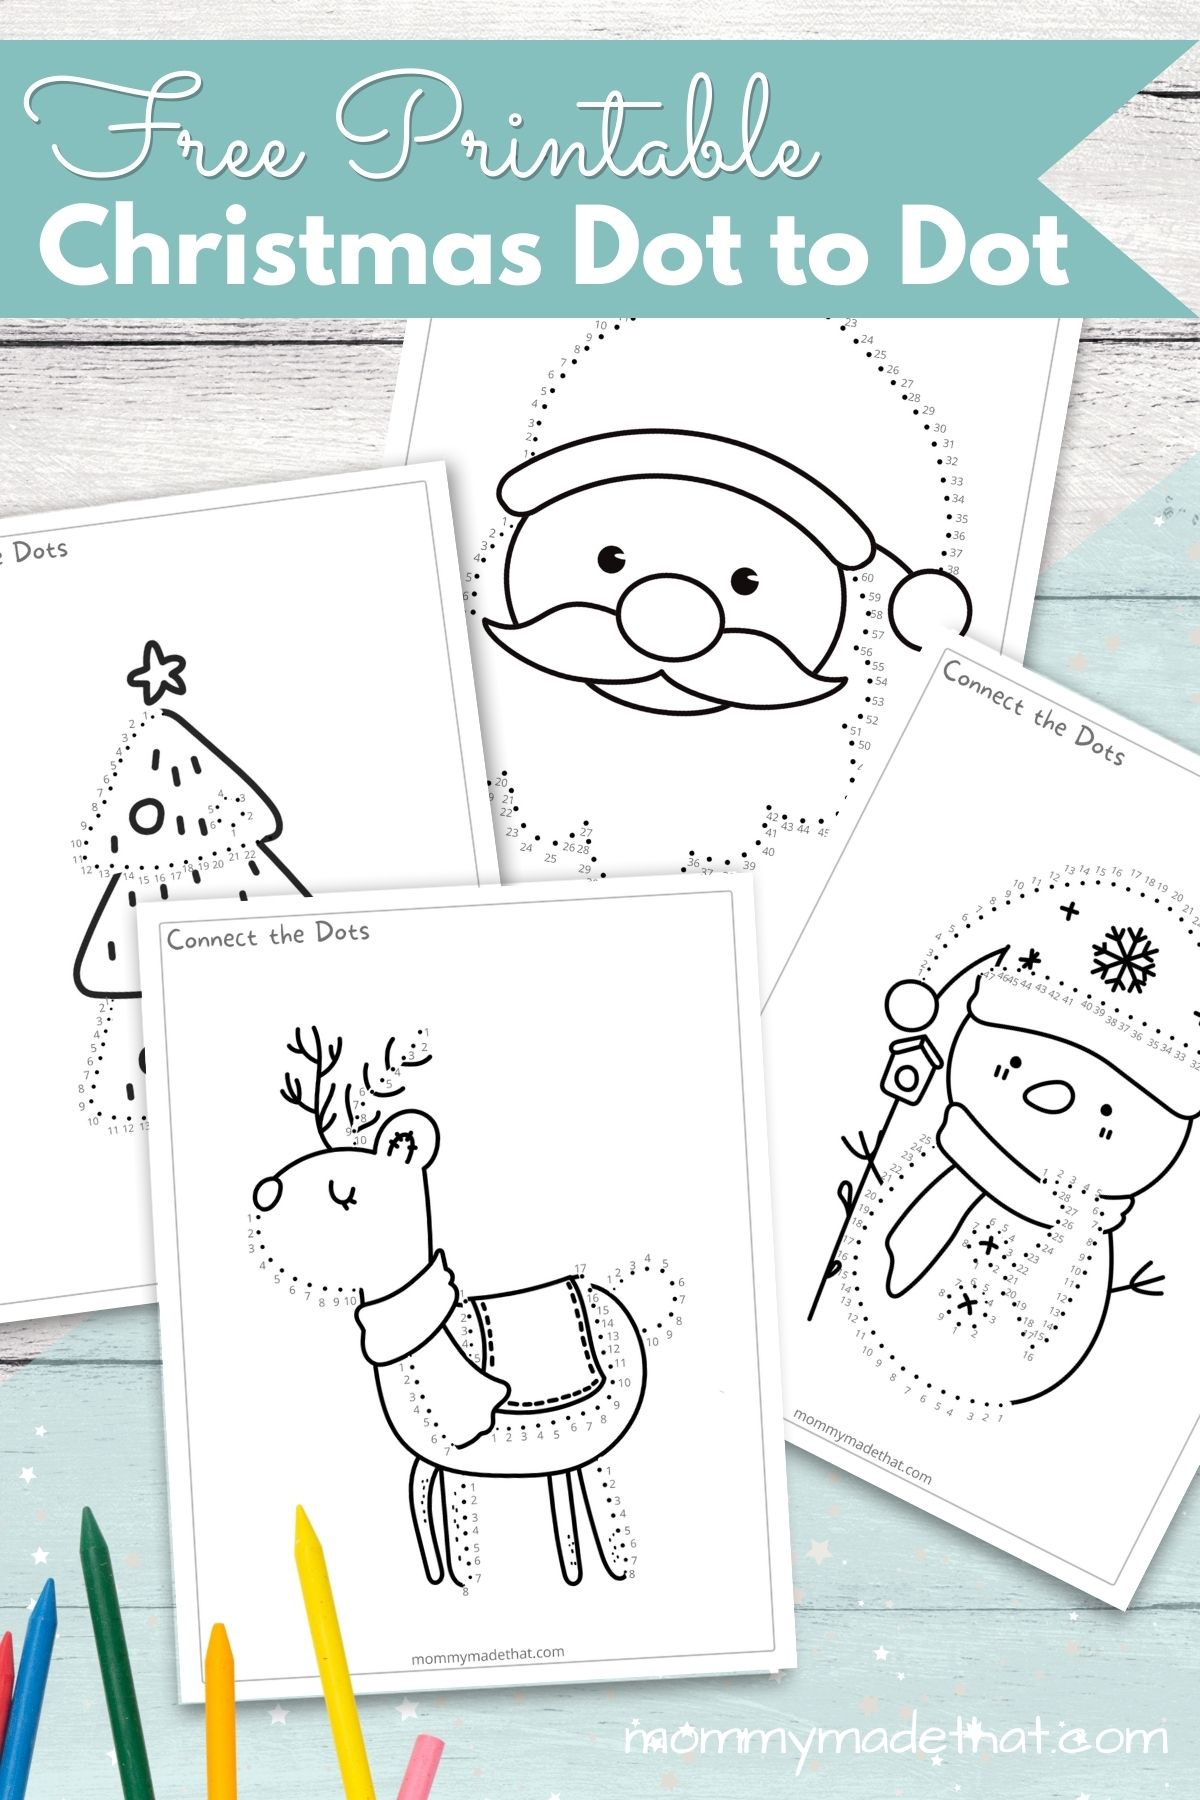 Free Printable Christmas Dot To Dot in Free Christmas Connect The Dots Worksheets Printable